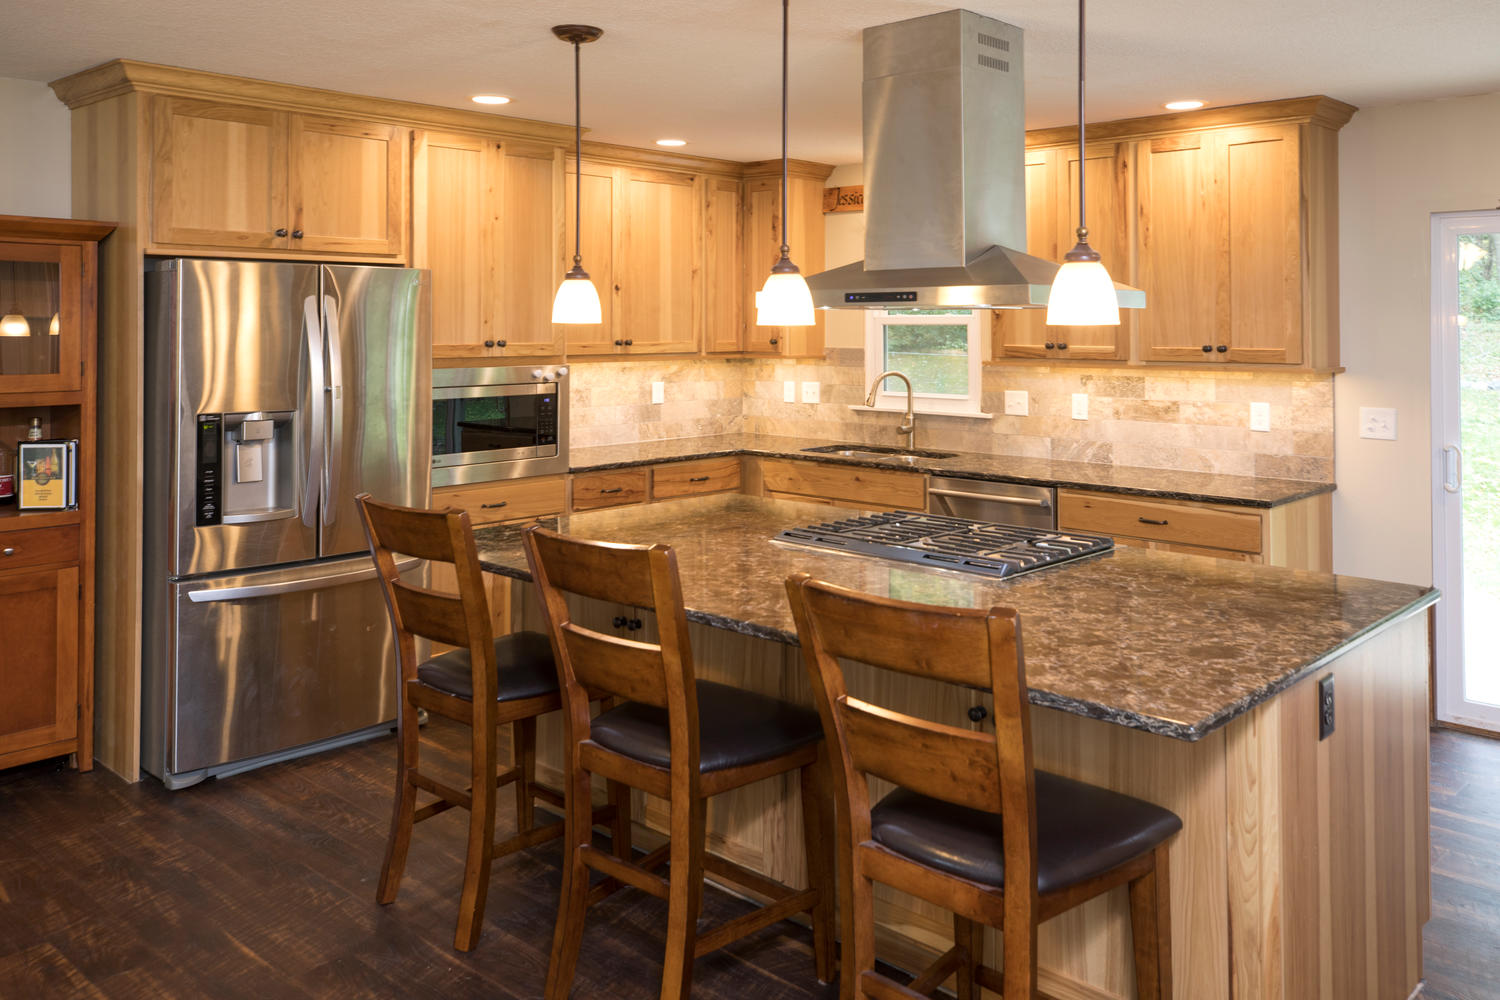 Apple Valley Kitchen Transformation - The Cabinet Store